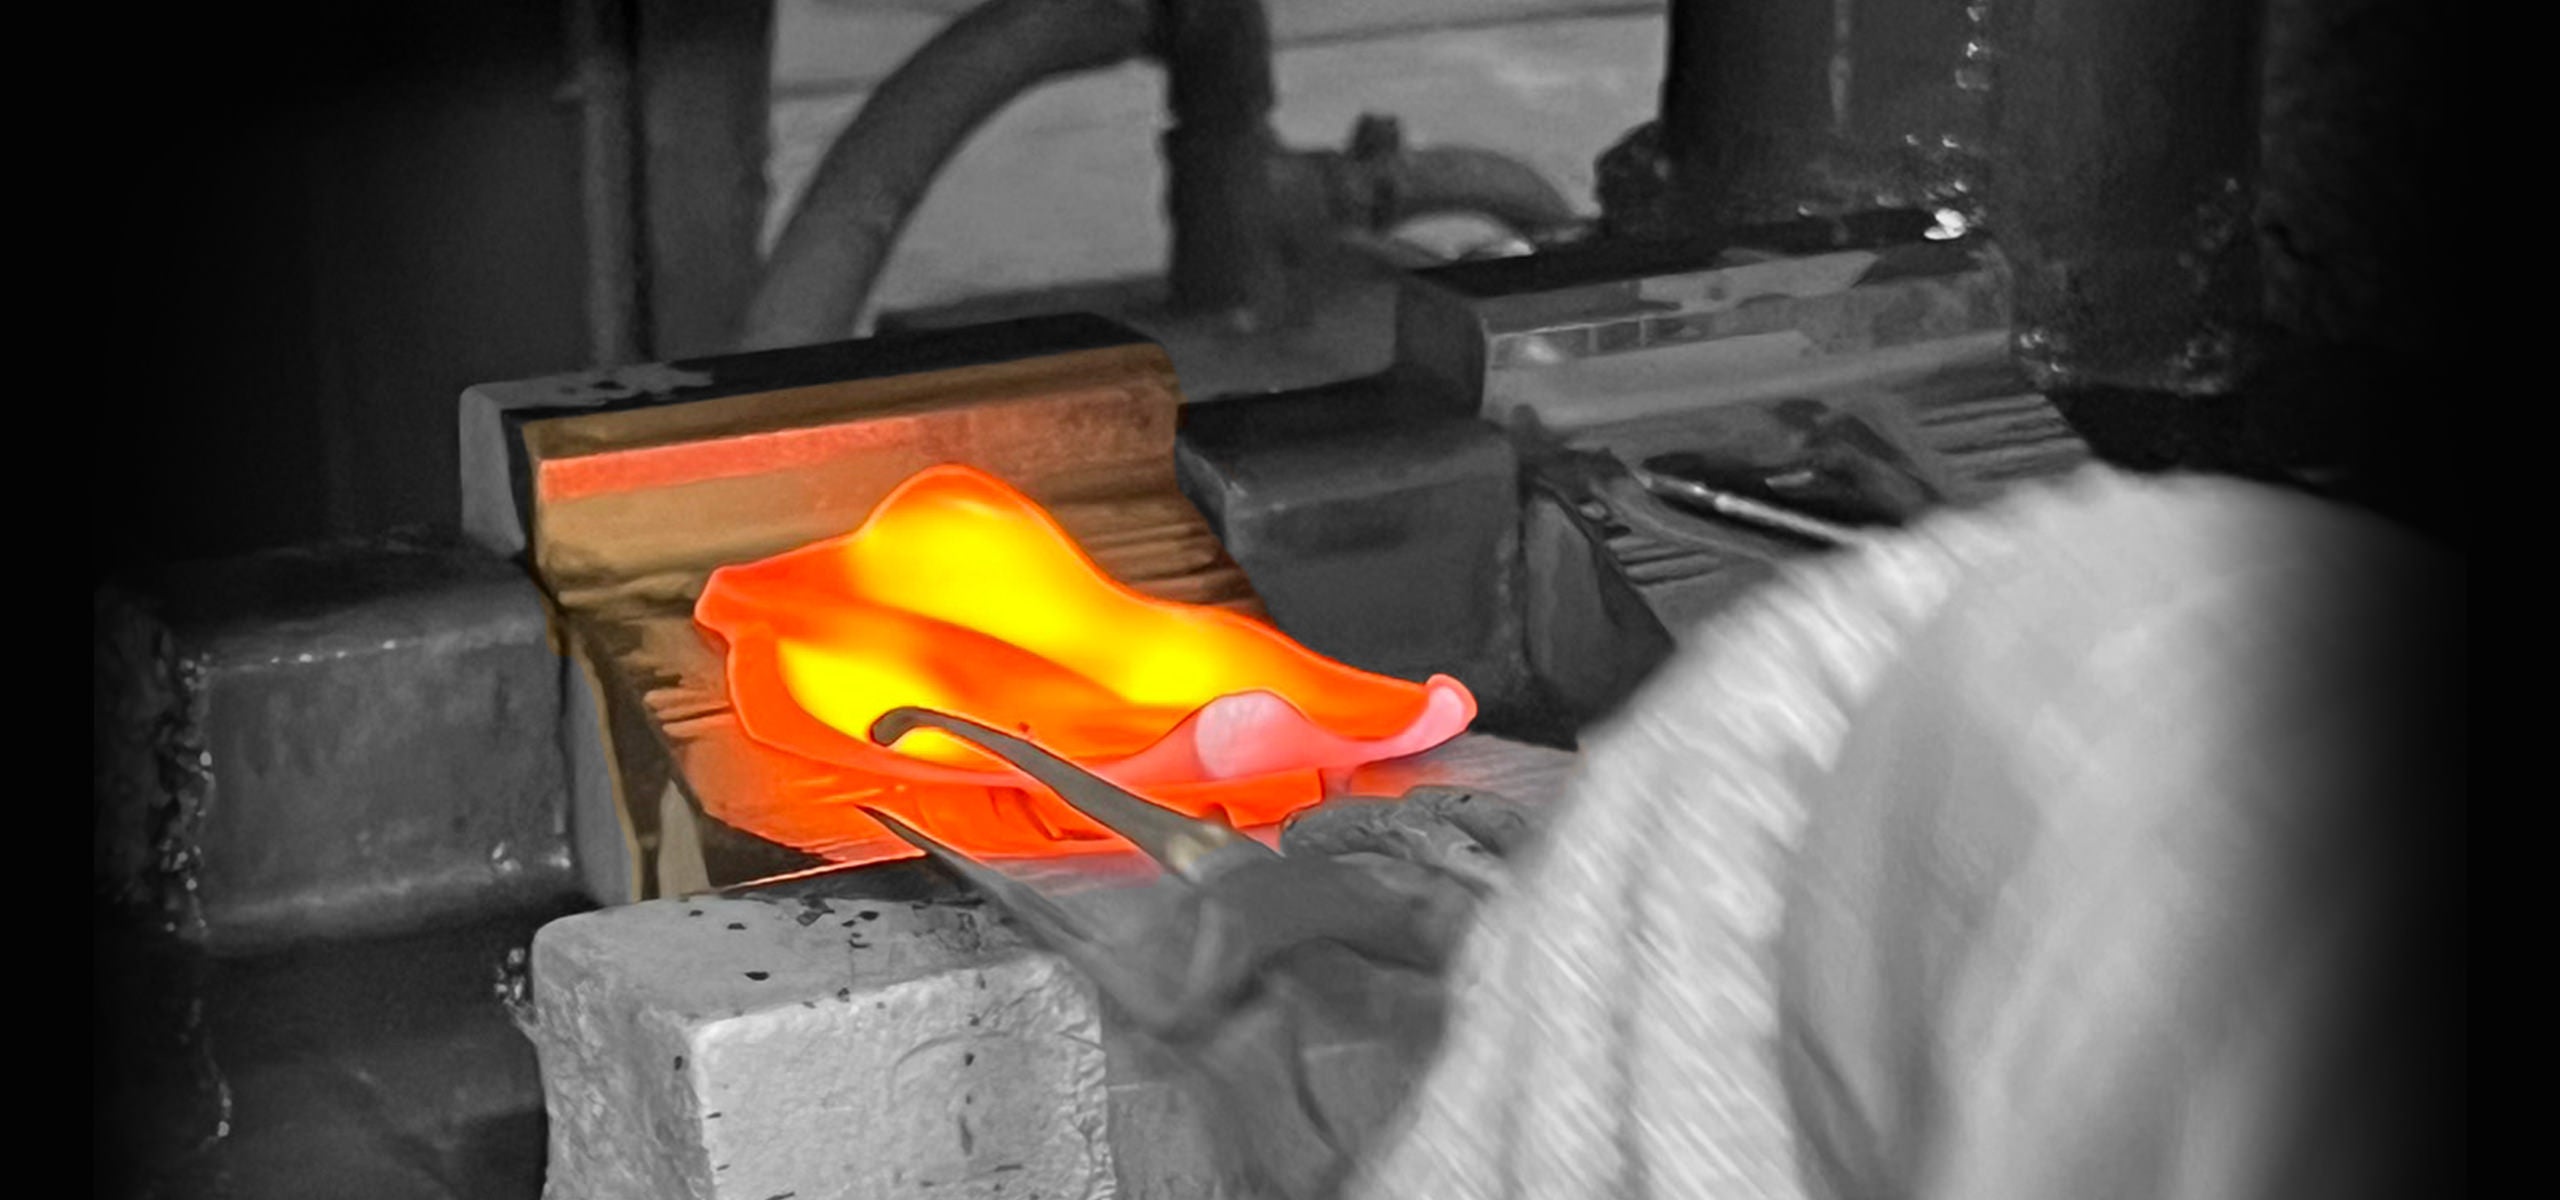 State-of-the-art forging technology that materializes our design concept